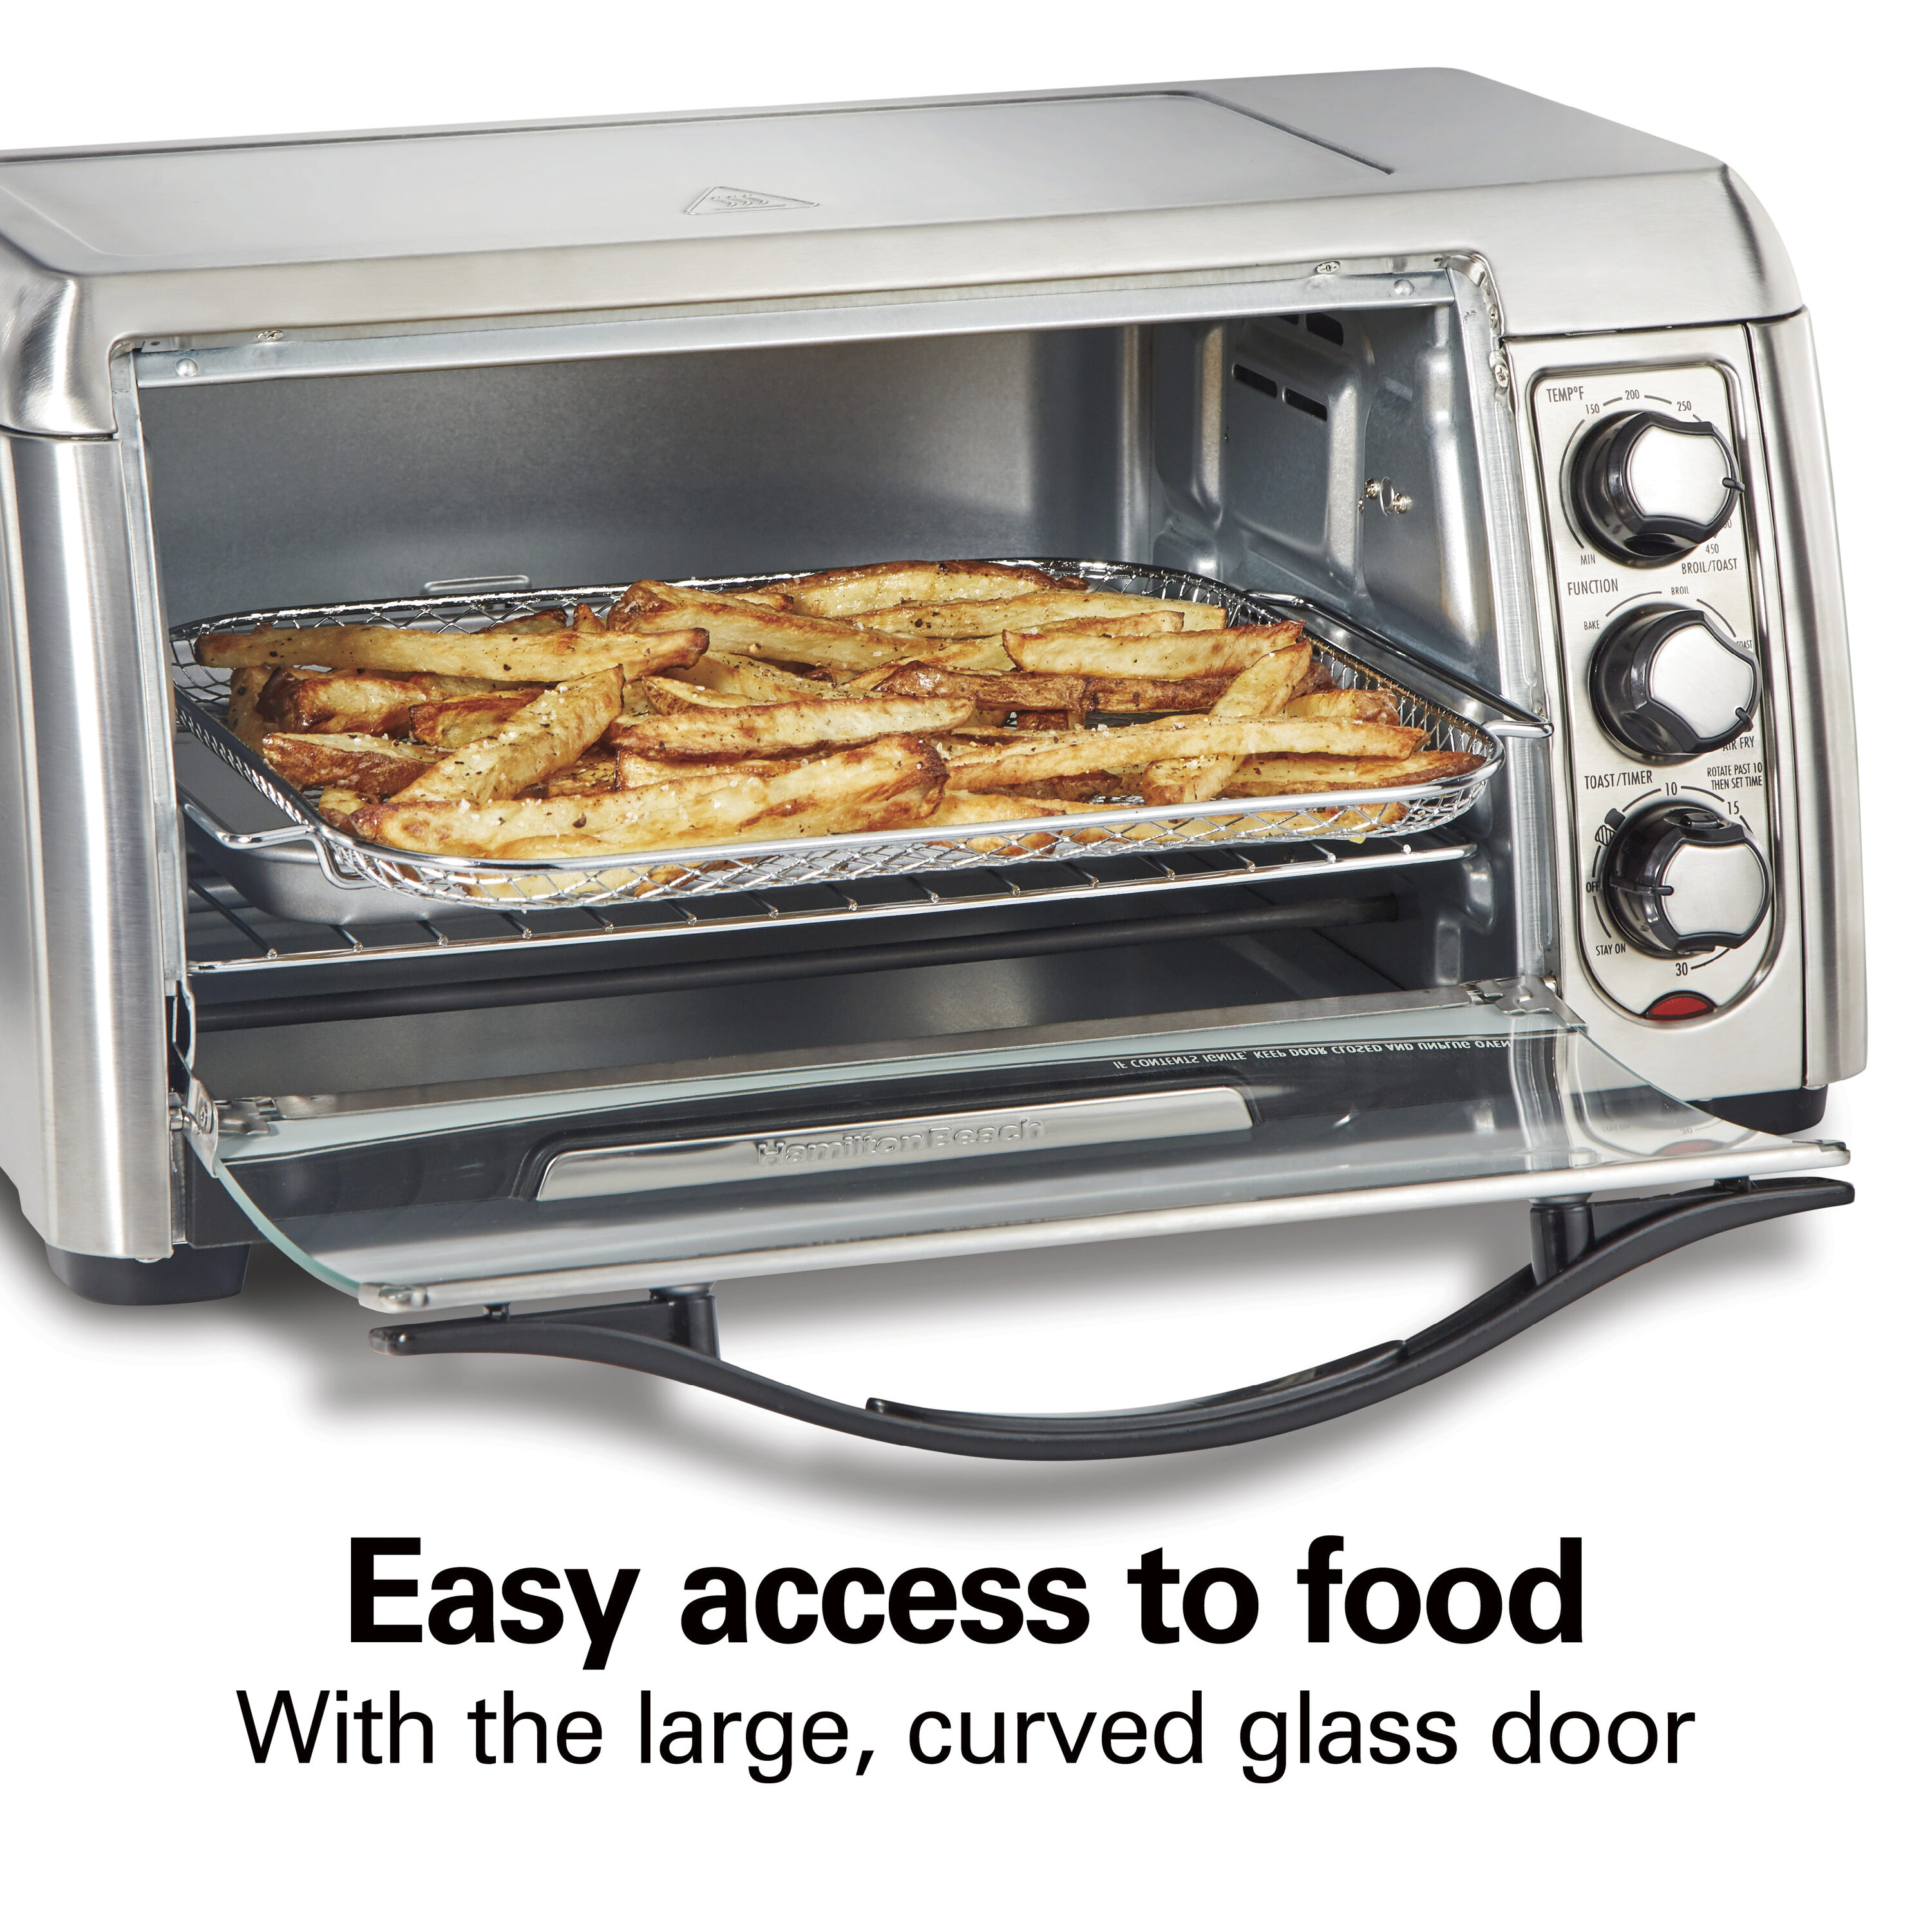 Hamilton Beach Professional Sure-Crisp Digital Toaster Oven Air Fryer Combo, 1500W, Fits 12” Pizza 6 Slice Capacity, Temperature Probe, Stainless